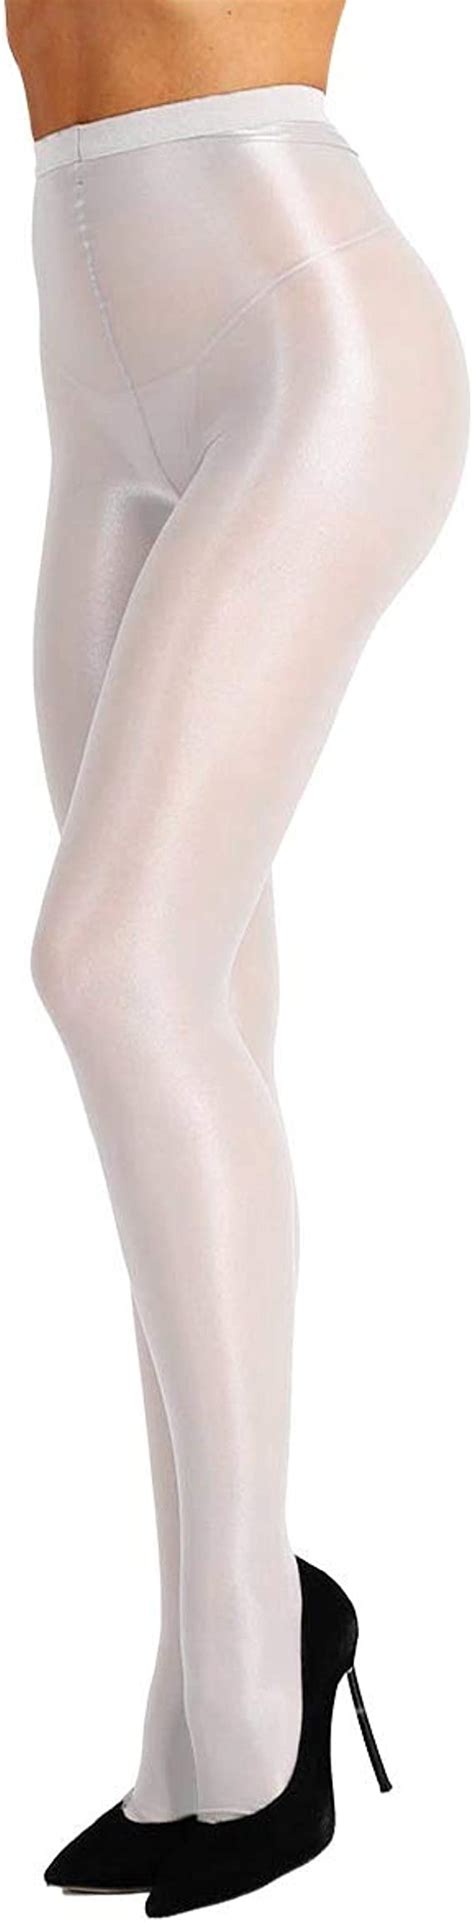 Agoky Women S Sheer Semi Opaque Footed Pantyhose Tights High Waist